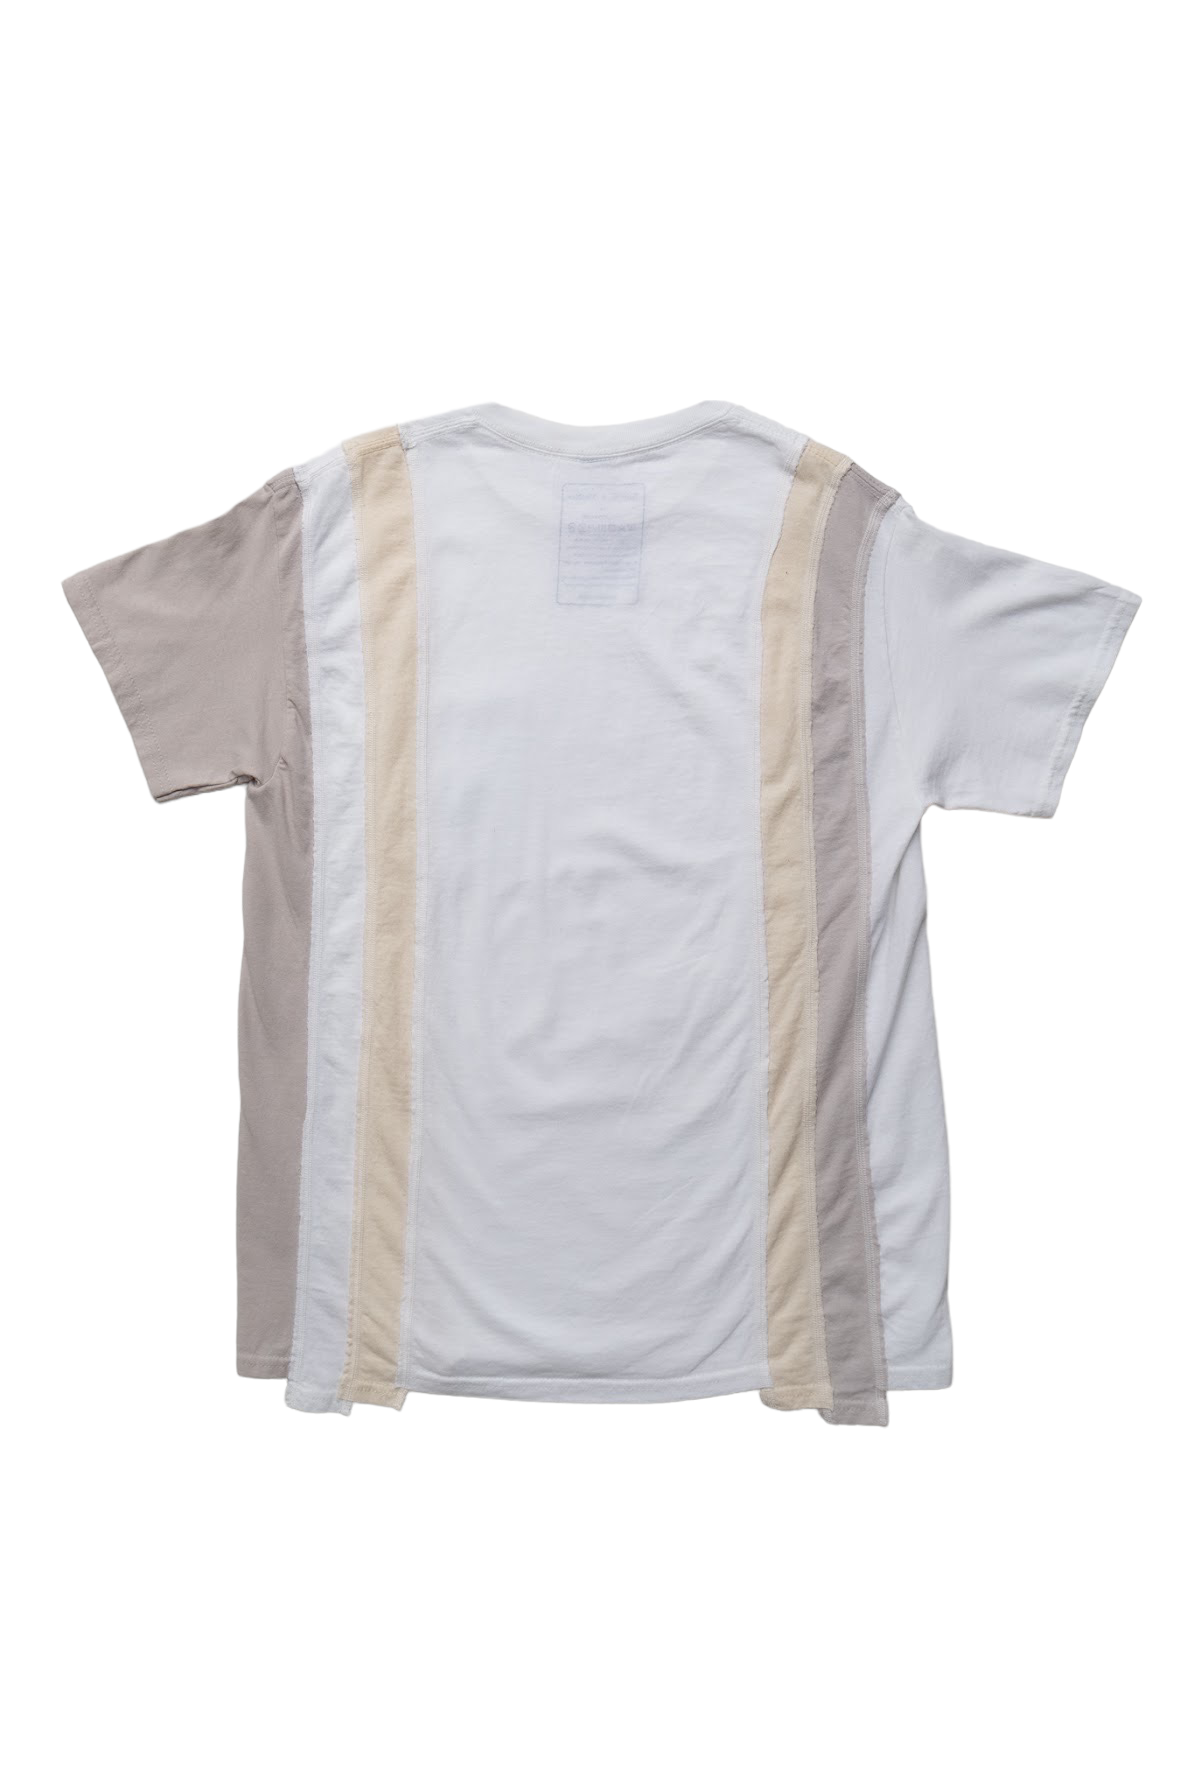 NEEDLES x DC SHOE 7 Cuts S/S Tee Solid/Fade - Ivory